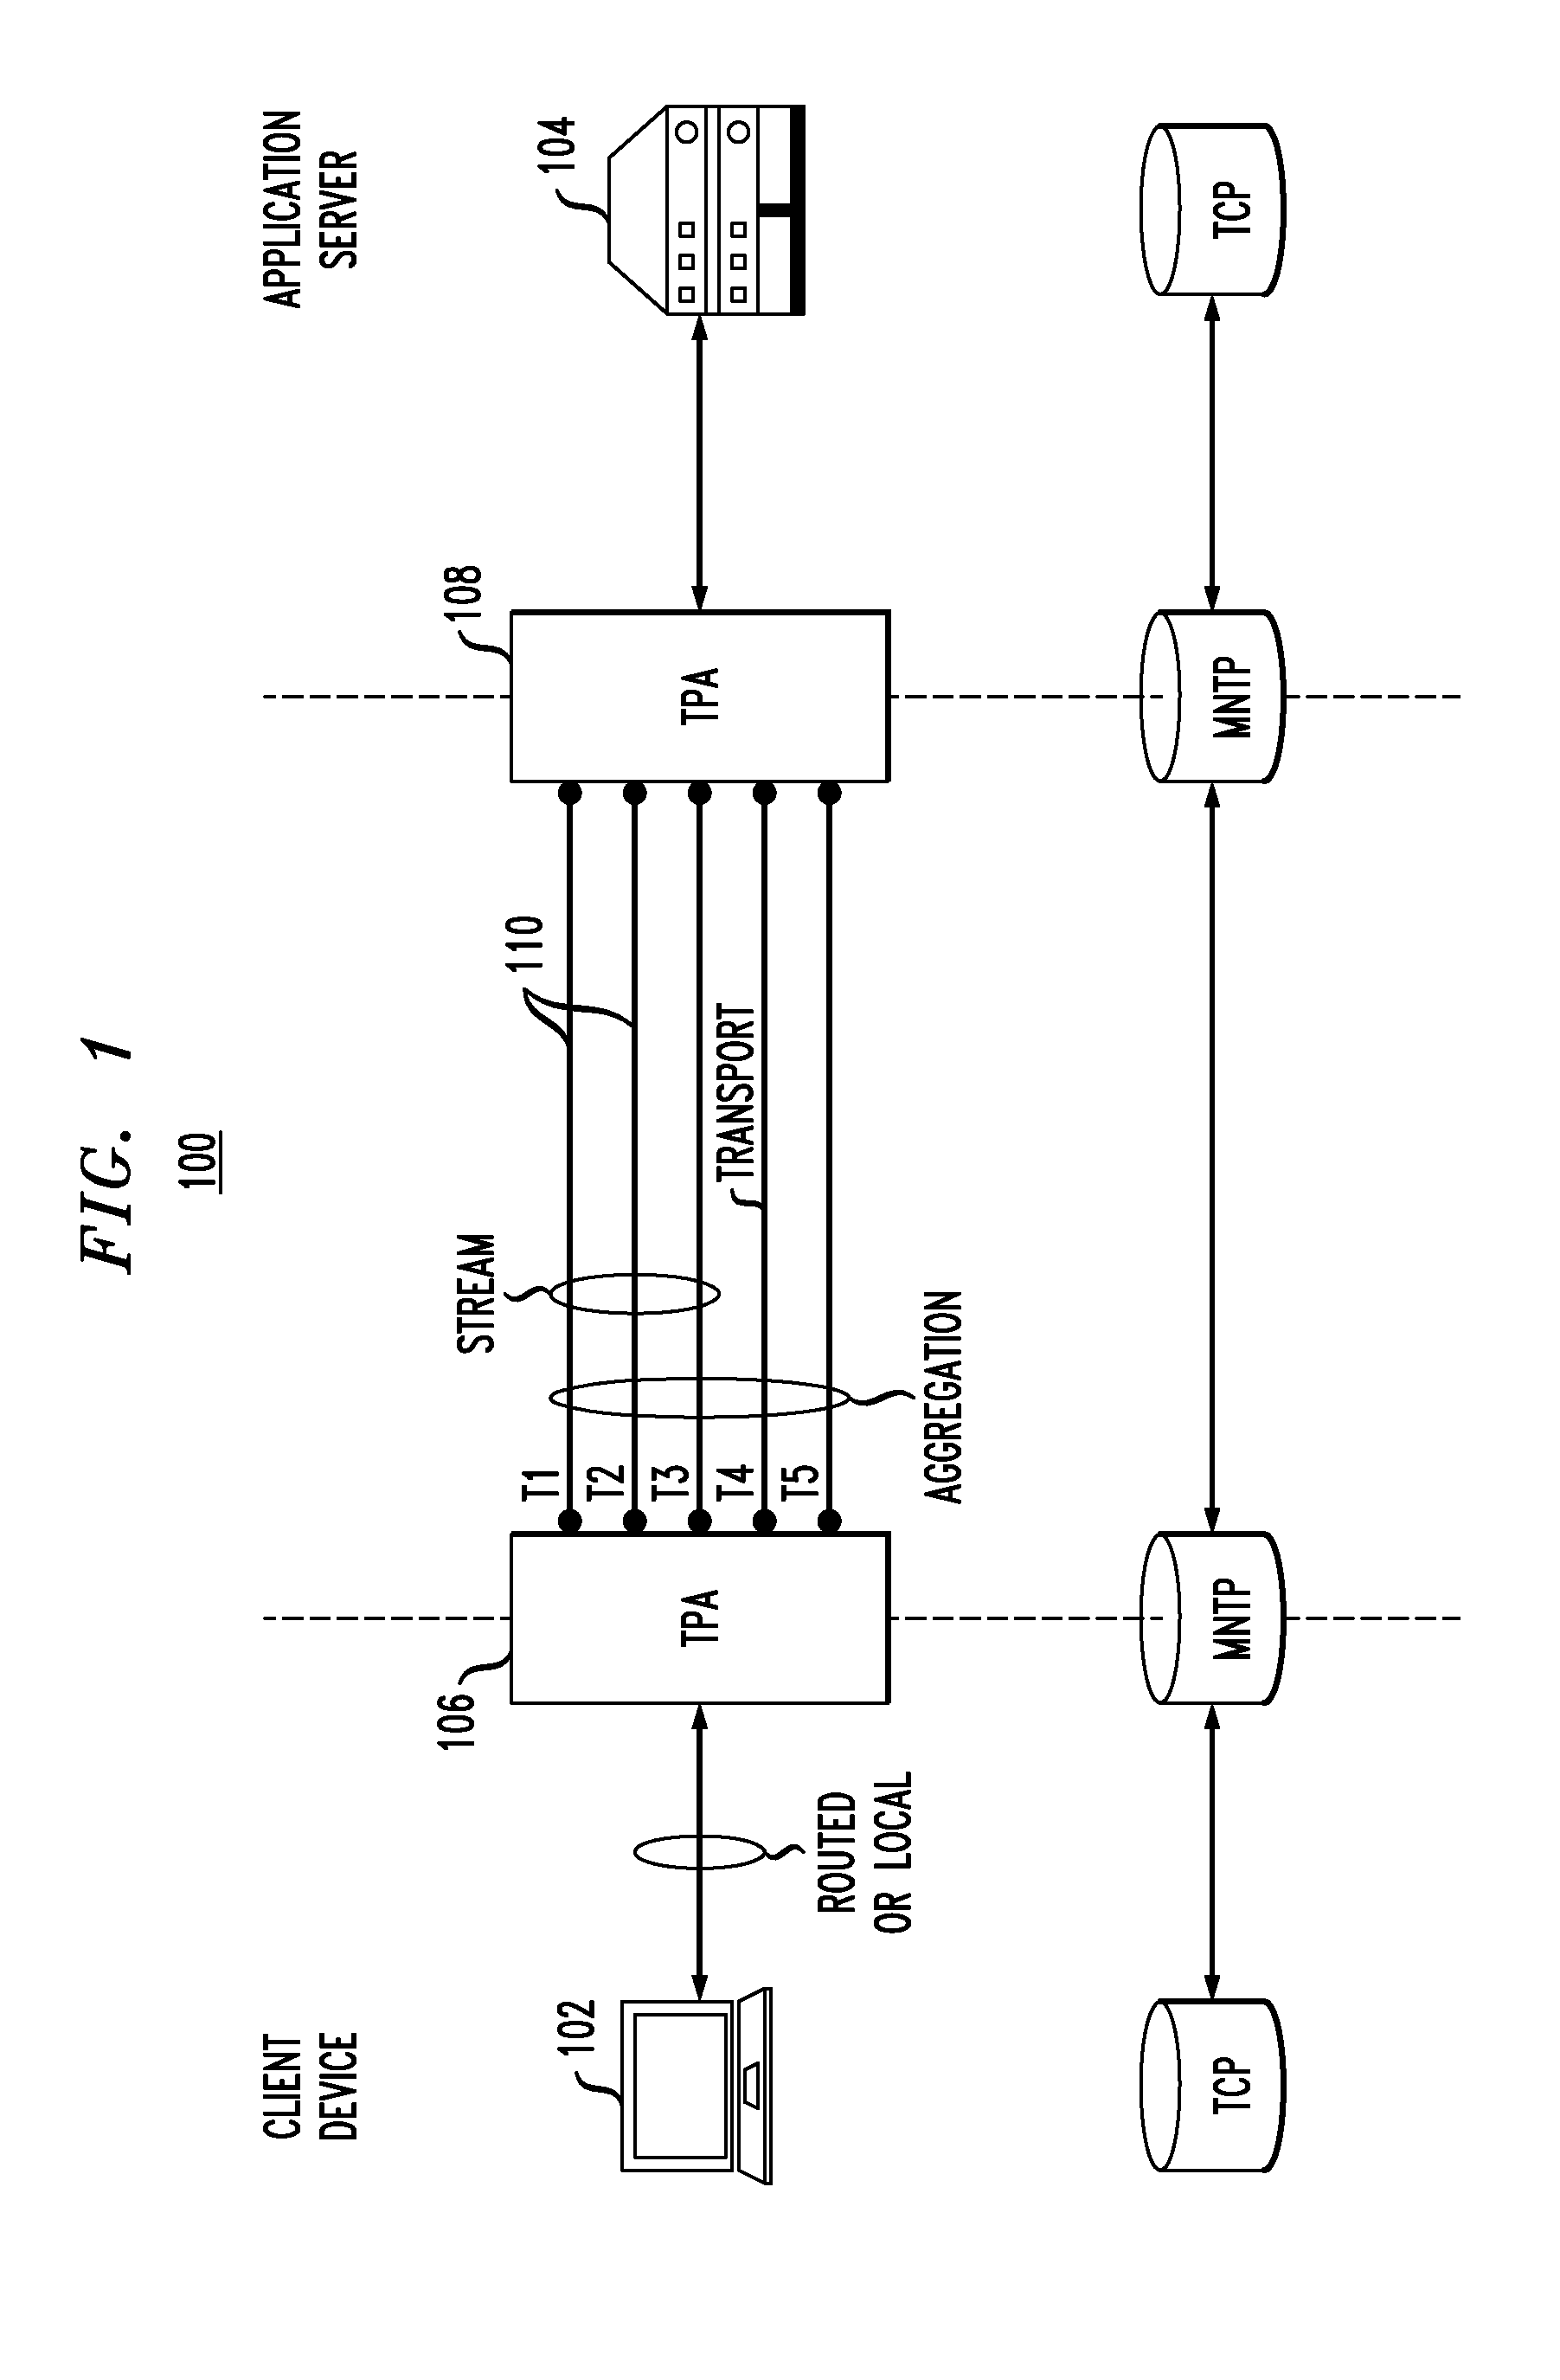 Transparent Proxy Architecture for Multi-Path Data Connections